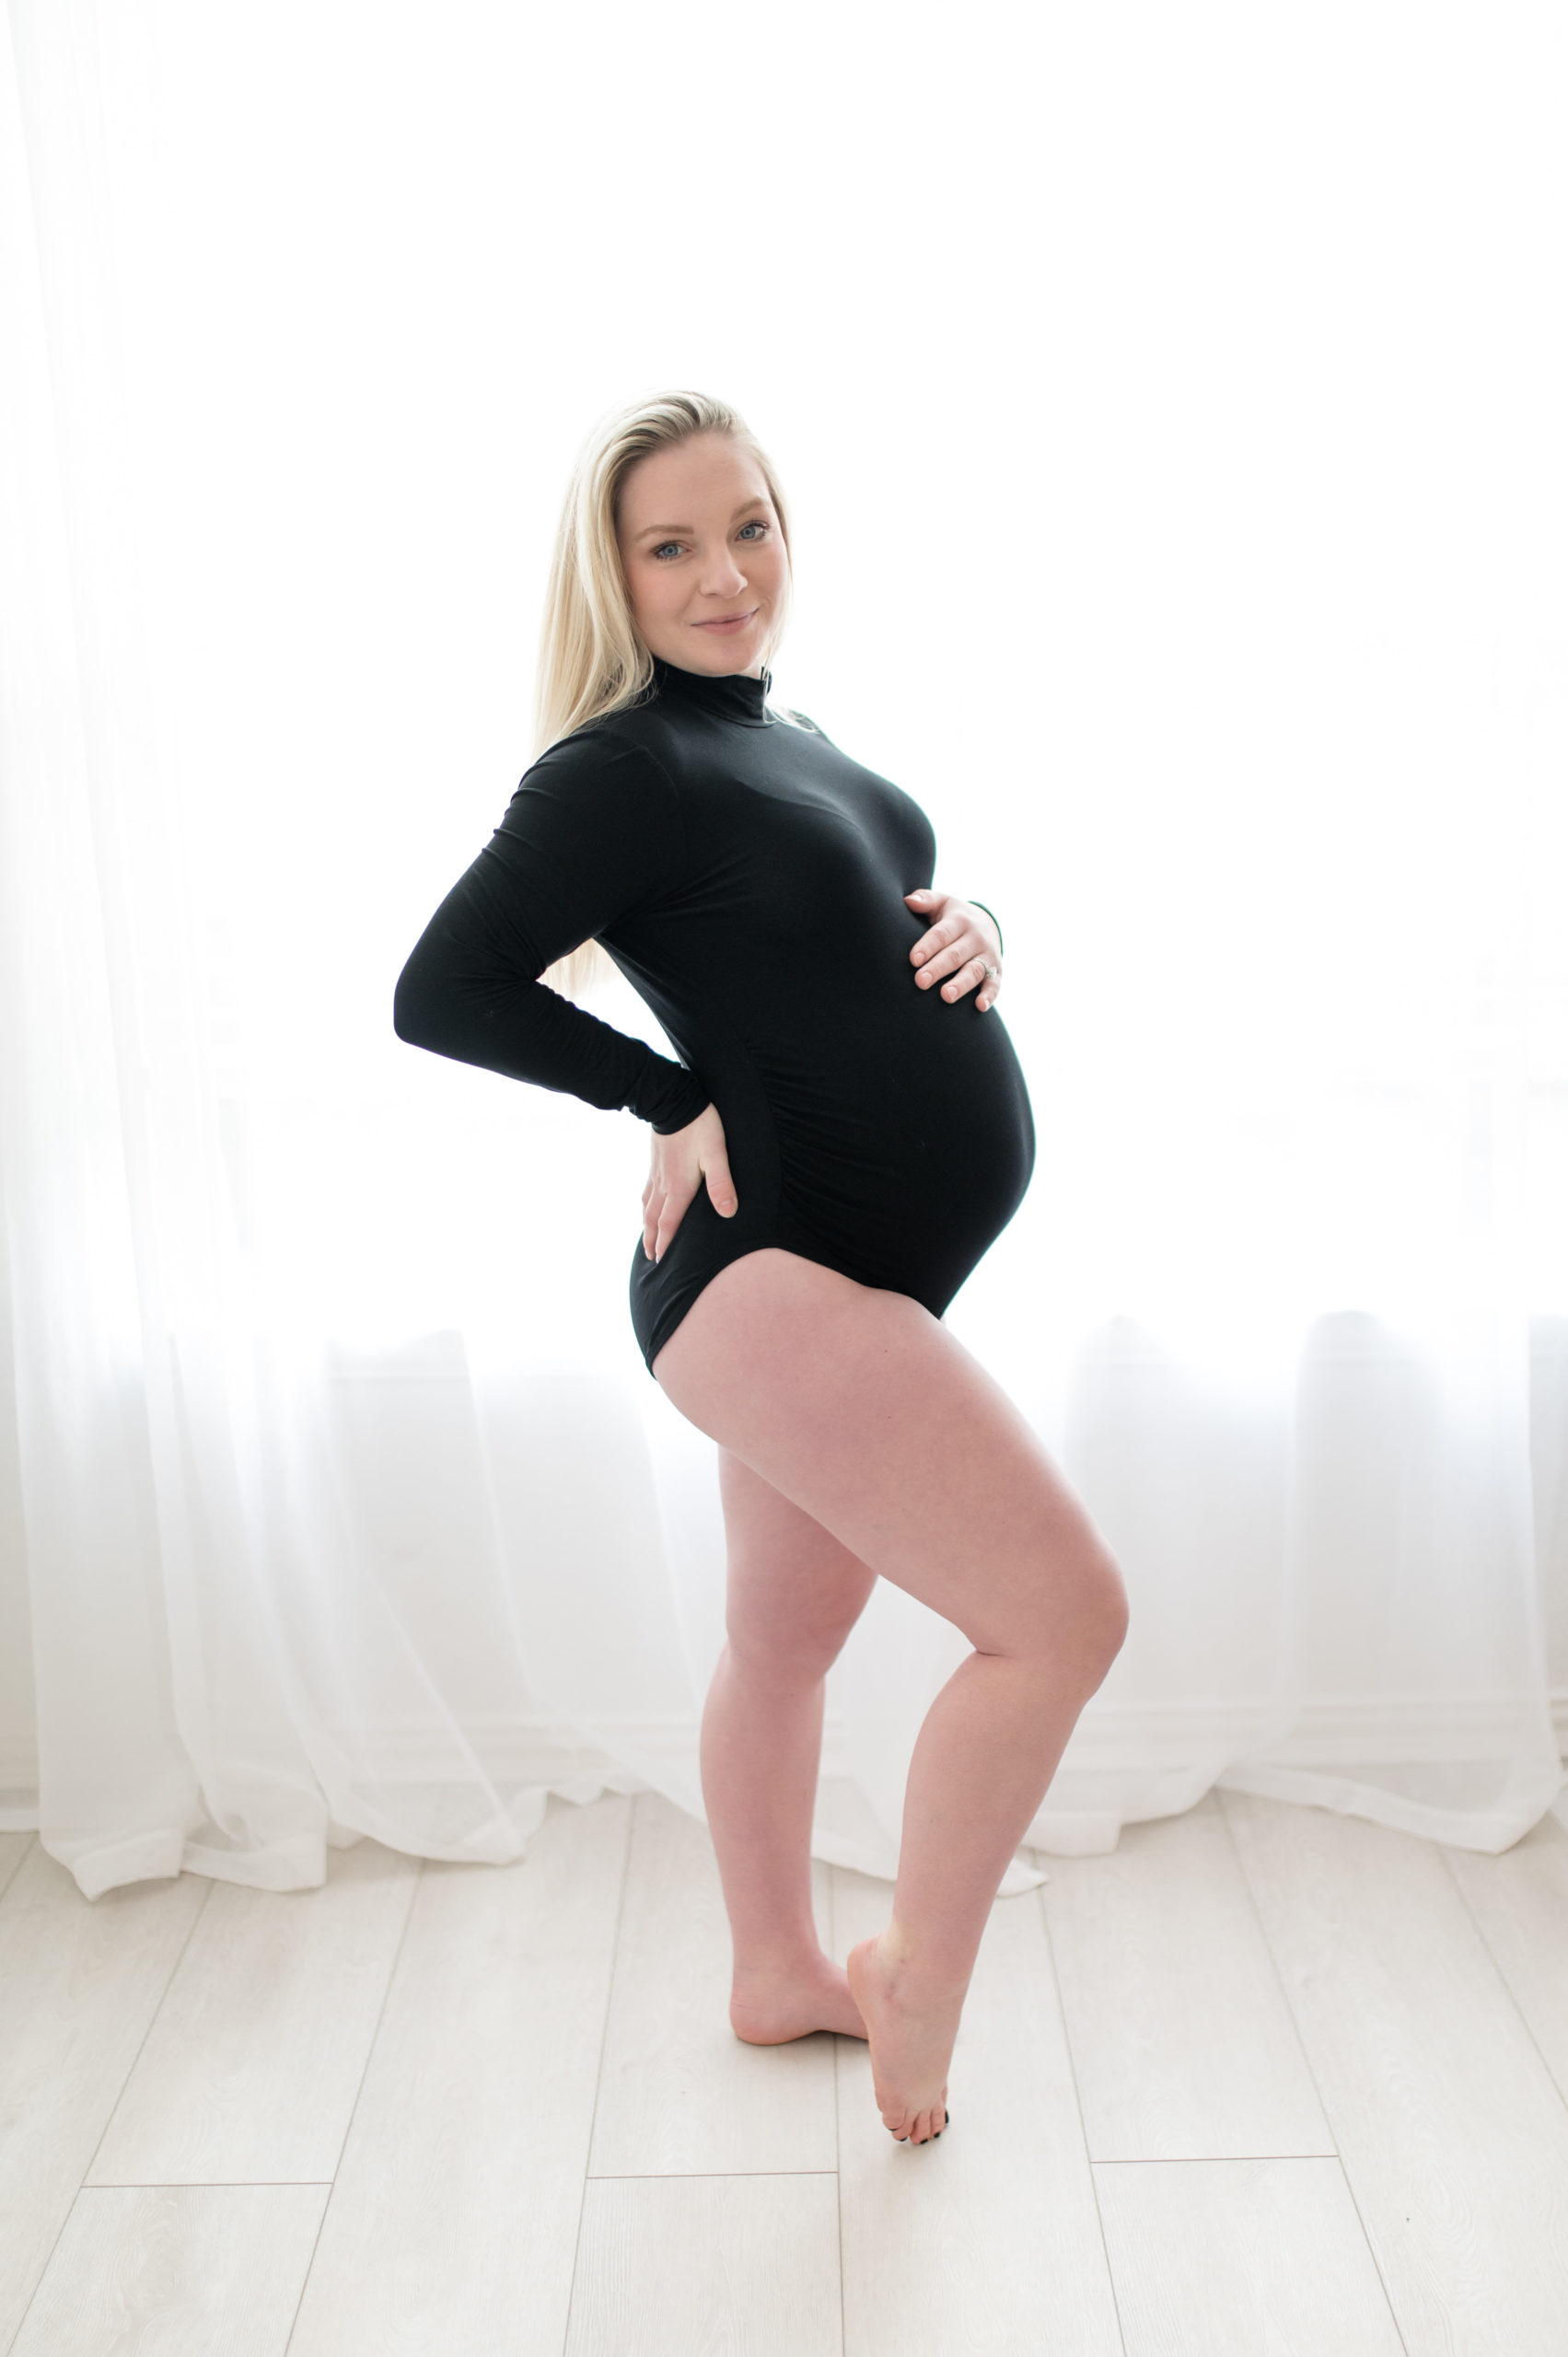 pregnant women in black body suit in a classy in studio maternity session photographed by Dallas newborn photographer, Lindsey Dutton Photography